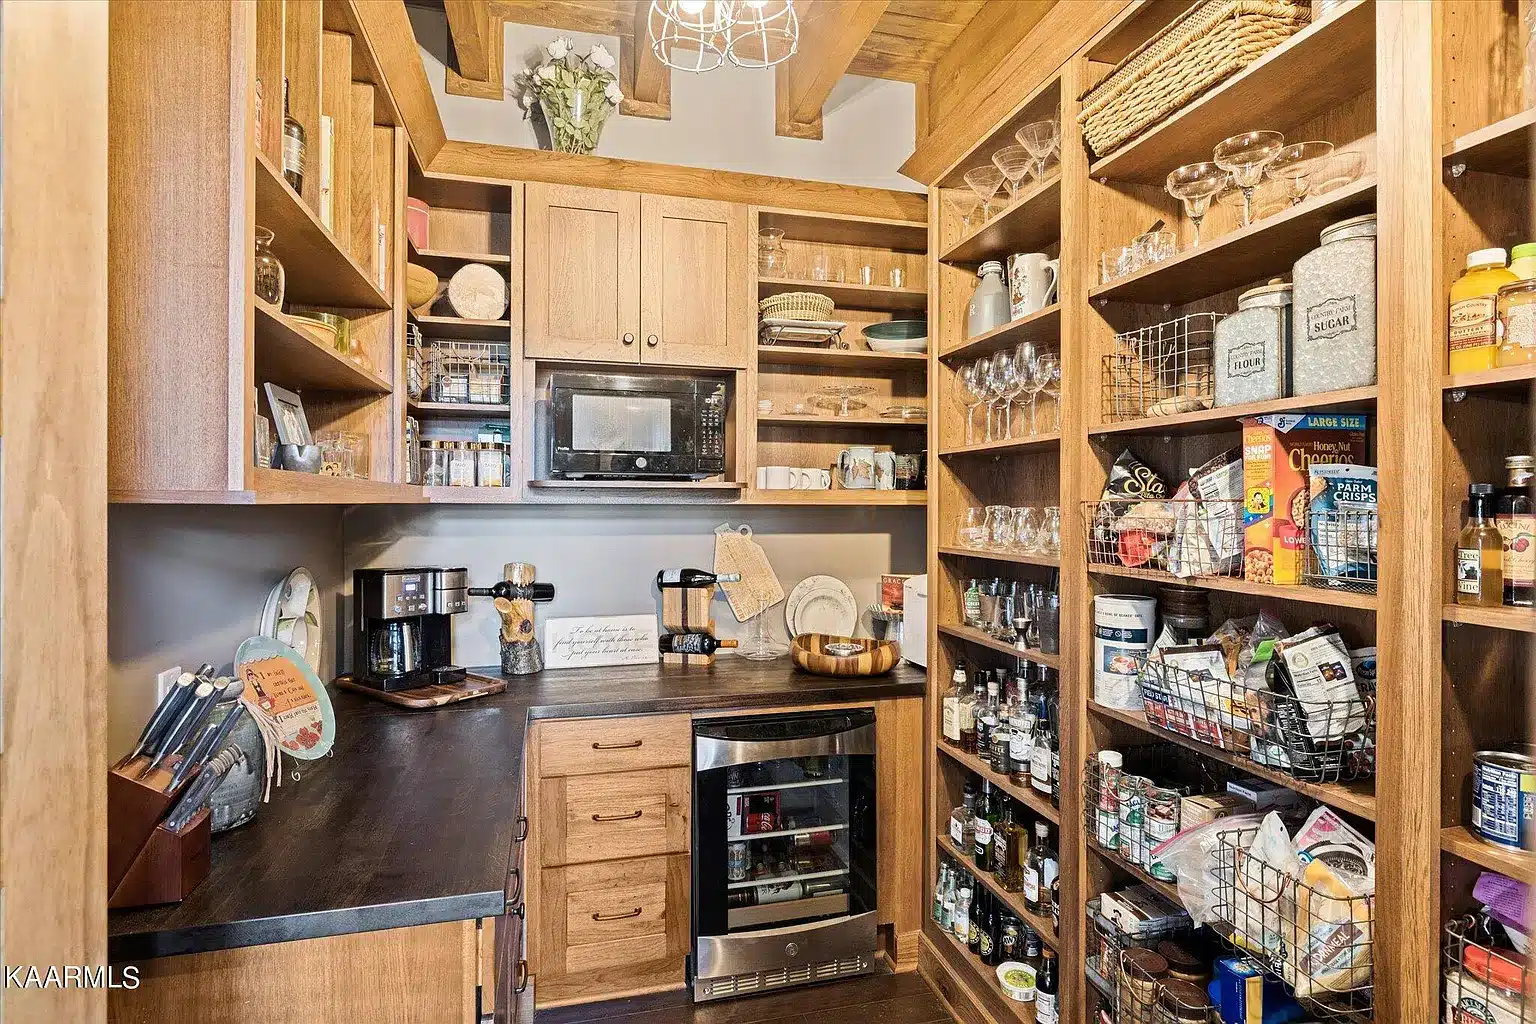 Ideal Pantry with great storage areas for appliances and goods to keep things uncluttered in the kitchen area